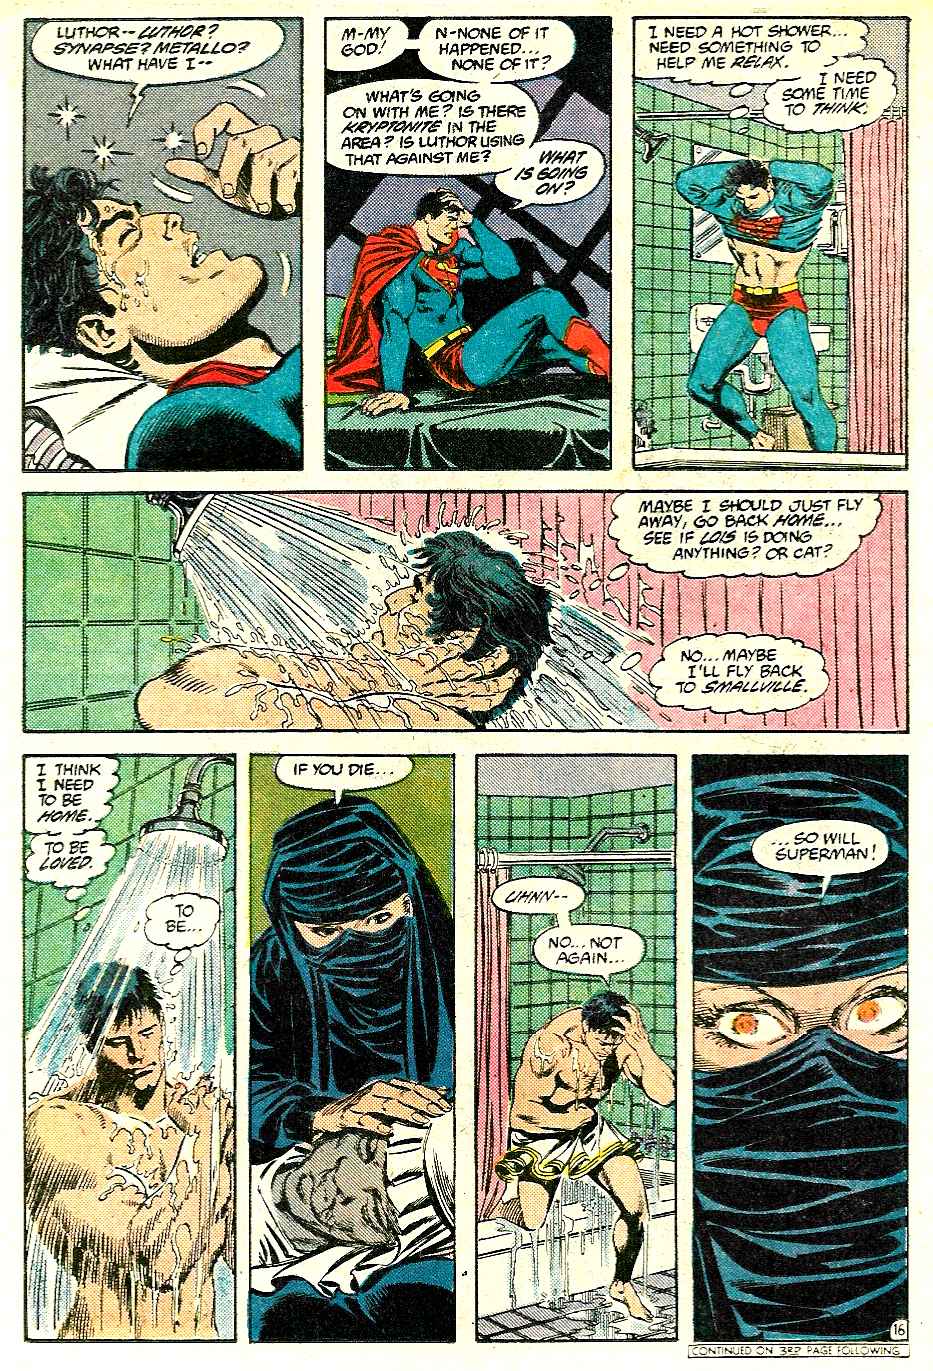 Adventures of Superman (1987) 427 Page 15